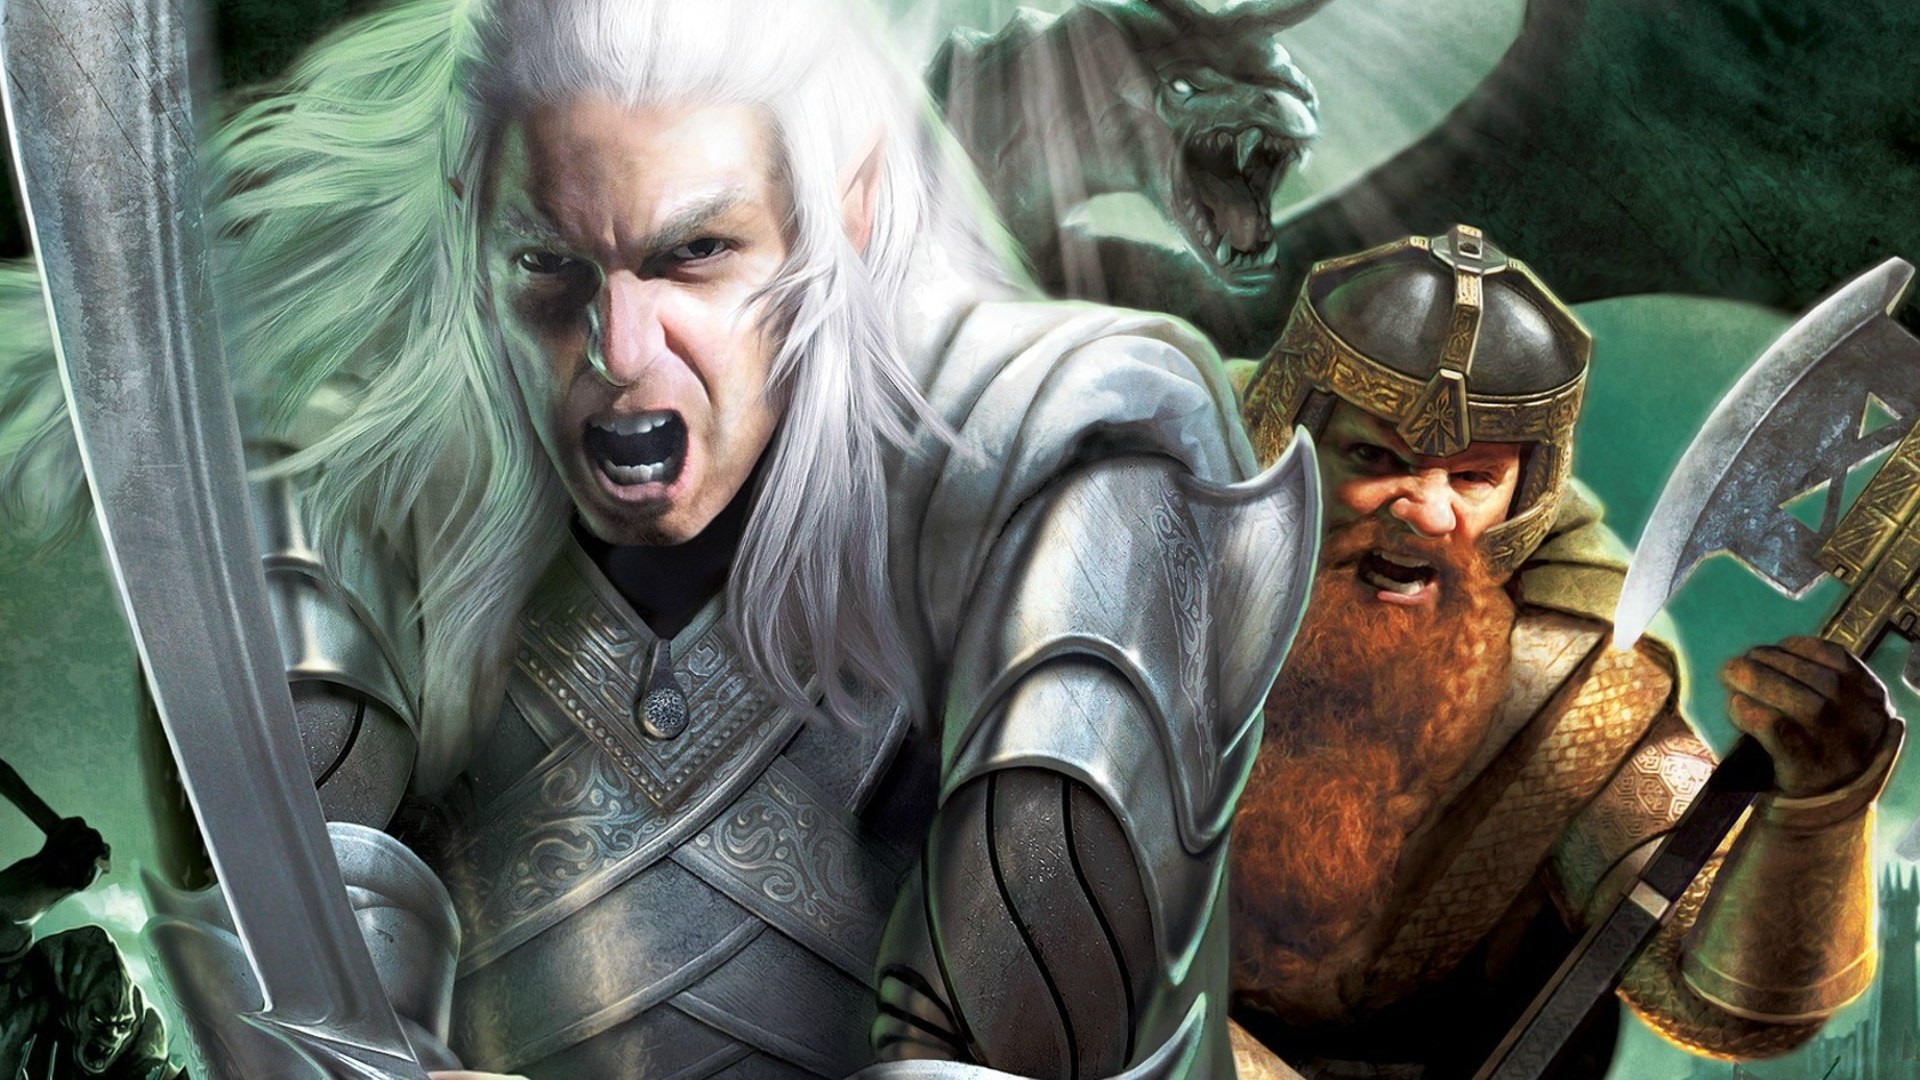 [16+] Прохождение The Lord of the Rings: The Battle for Middle-earth II. Эпизод 3